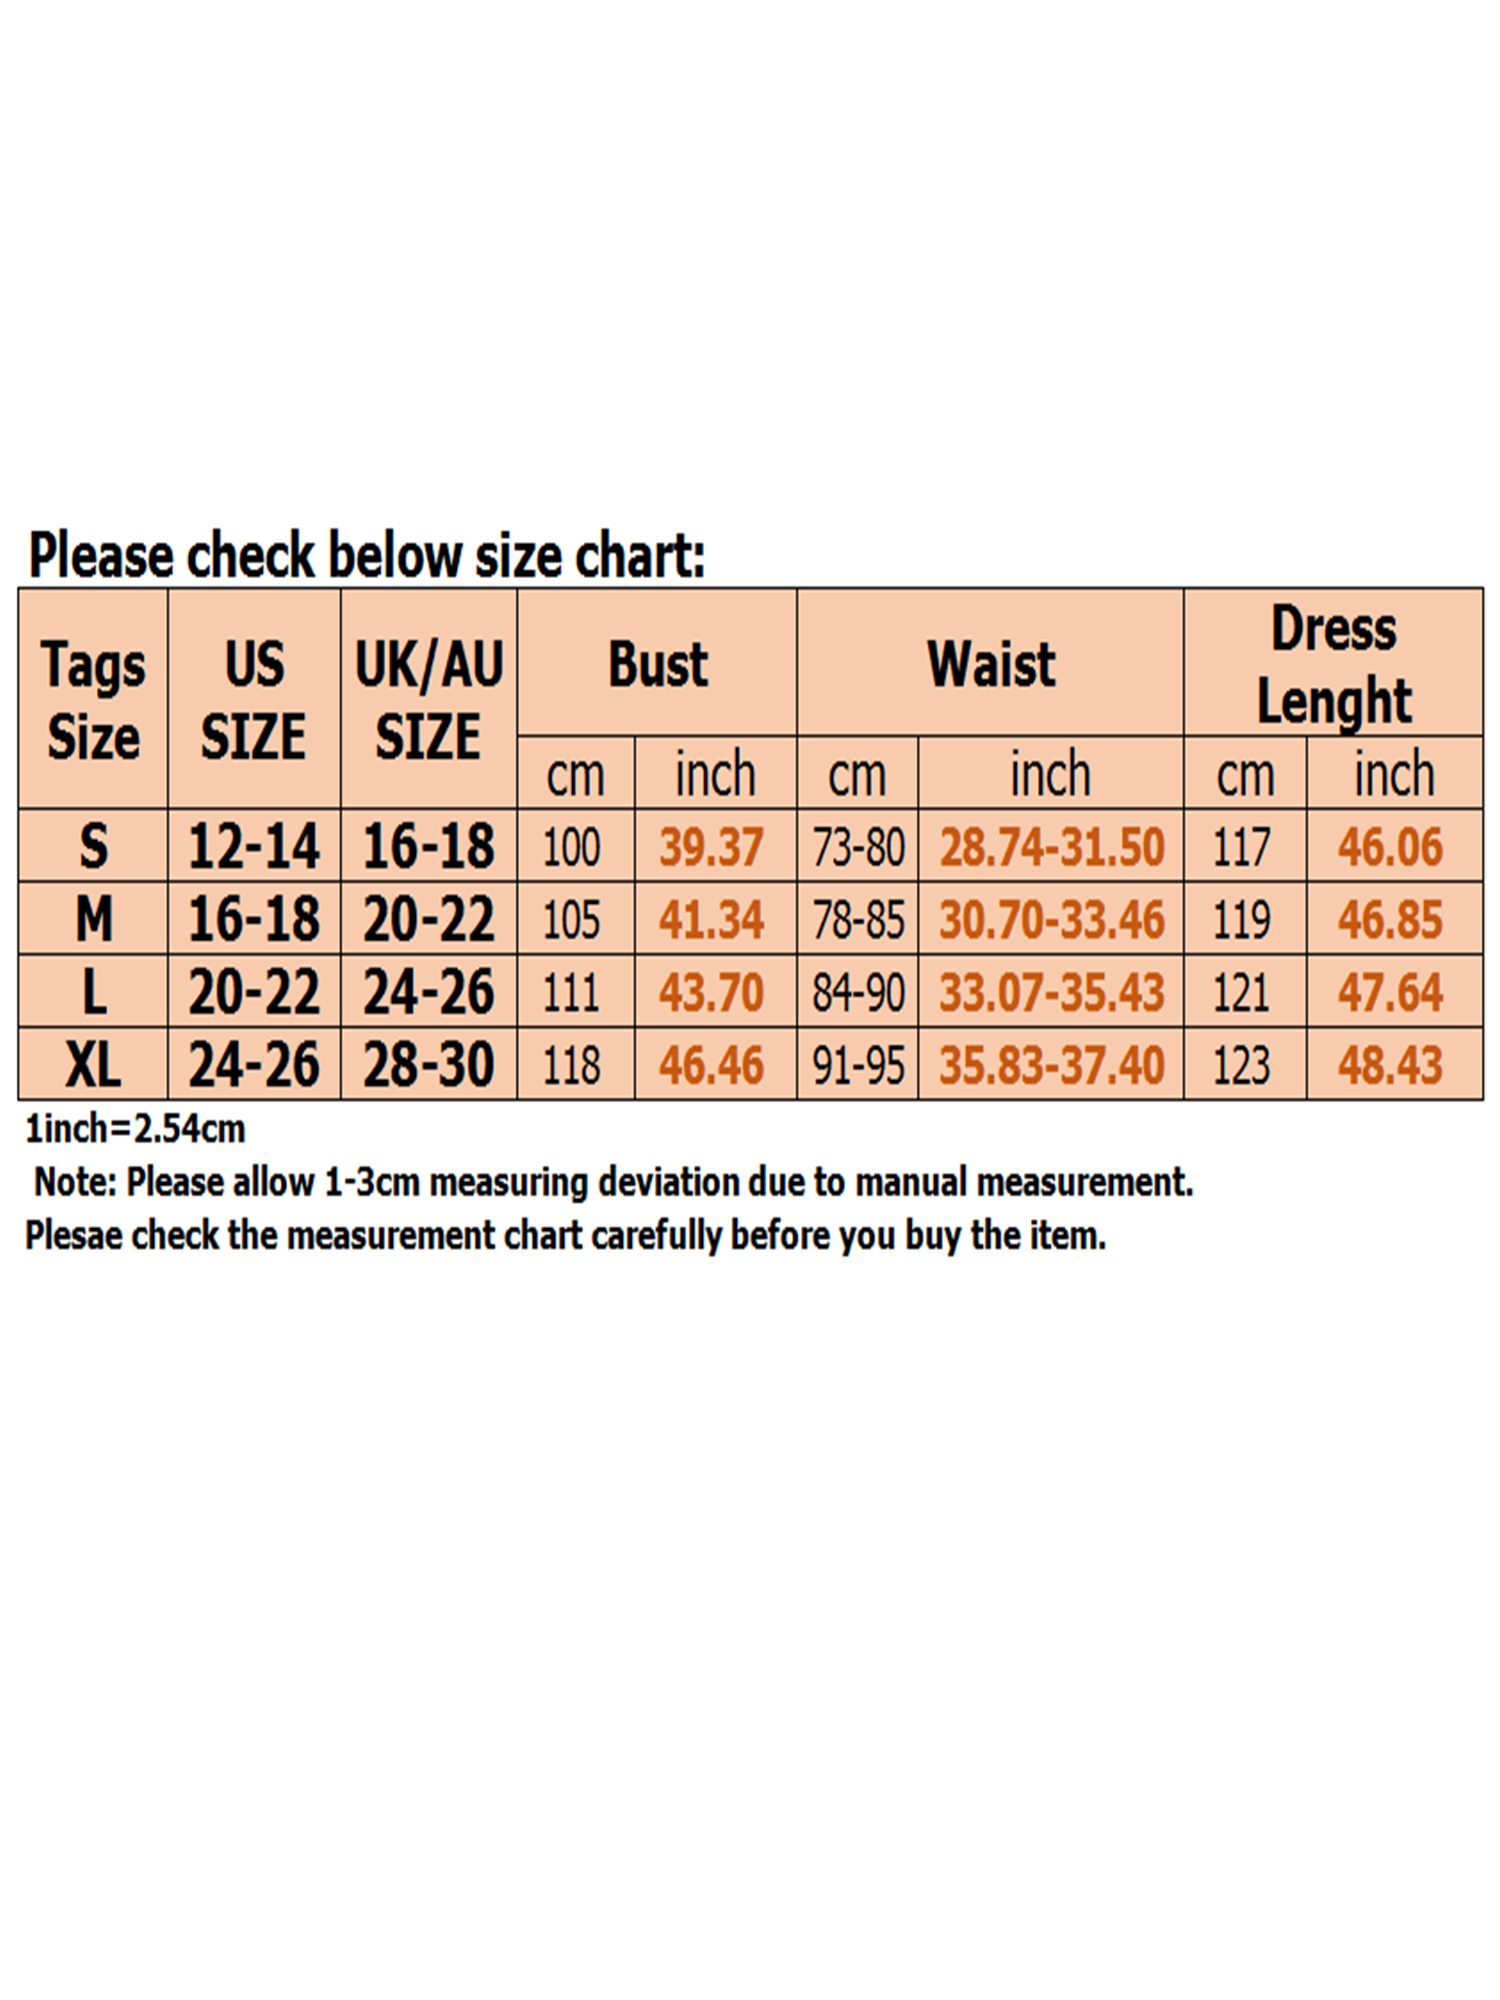 Hot Winter Women Long Sleeve Casual Sweater Dress Ladies Slim Fit Loose Maxi Wrap Kimono Knit Sun Dress Evening Prom Cocktail Party V-Neck Sexy Bodycon Split Sweater Long Dress With Waist Tie - image 2 of 5